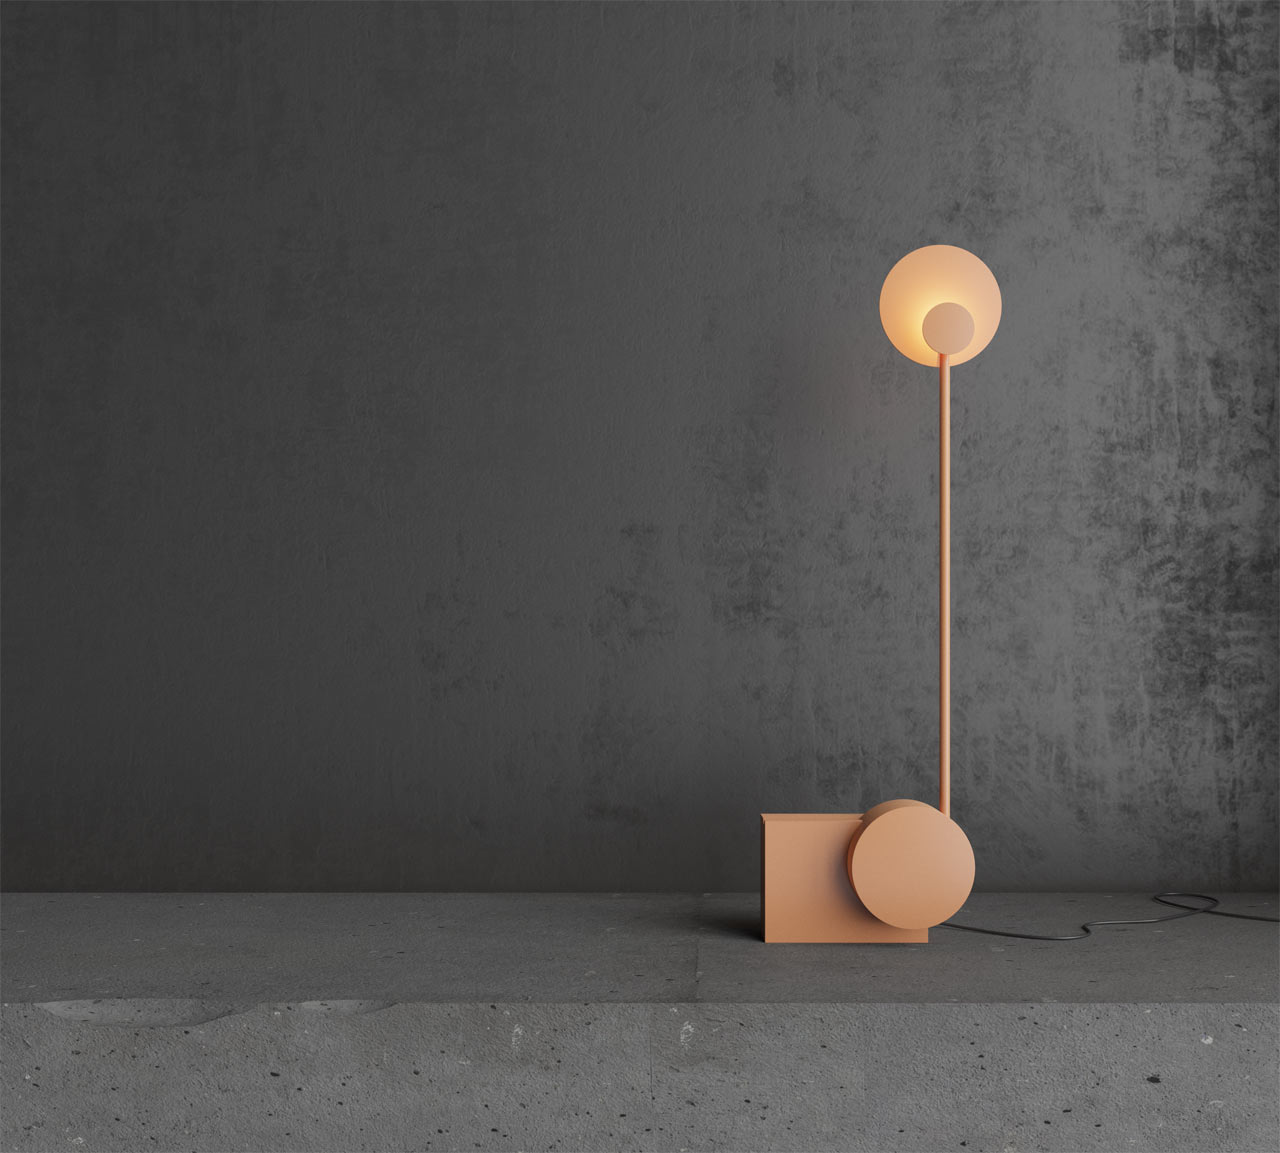 RA table lamp is inspired by the sun movements and it interacts with you and inspires you to move, too